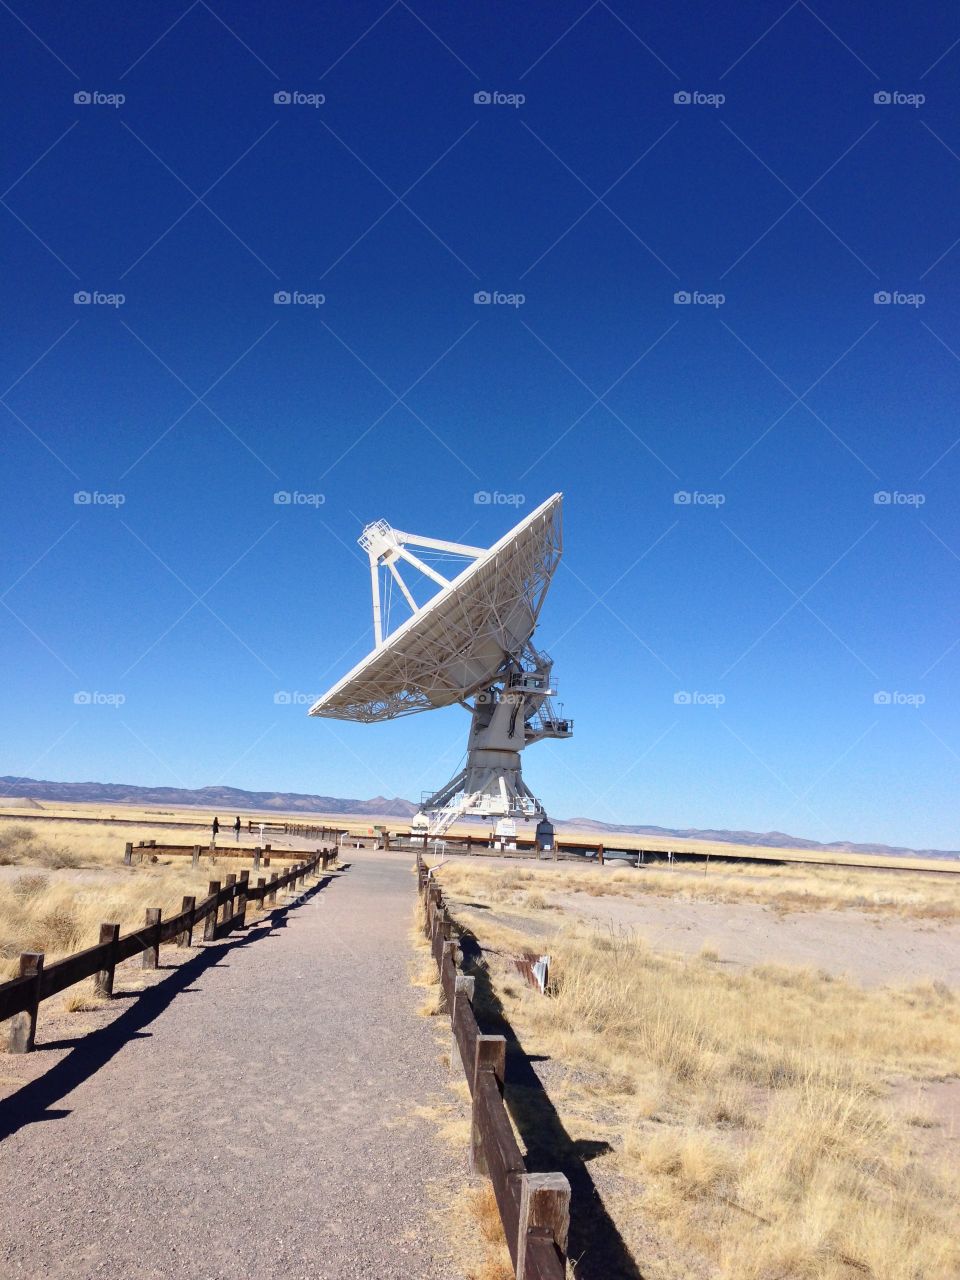 Walkway to a dish at the Very Large Array (VLA) in New Mexico.